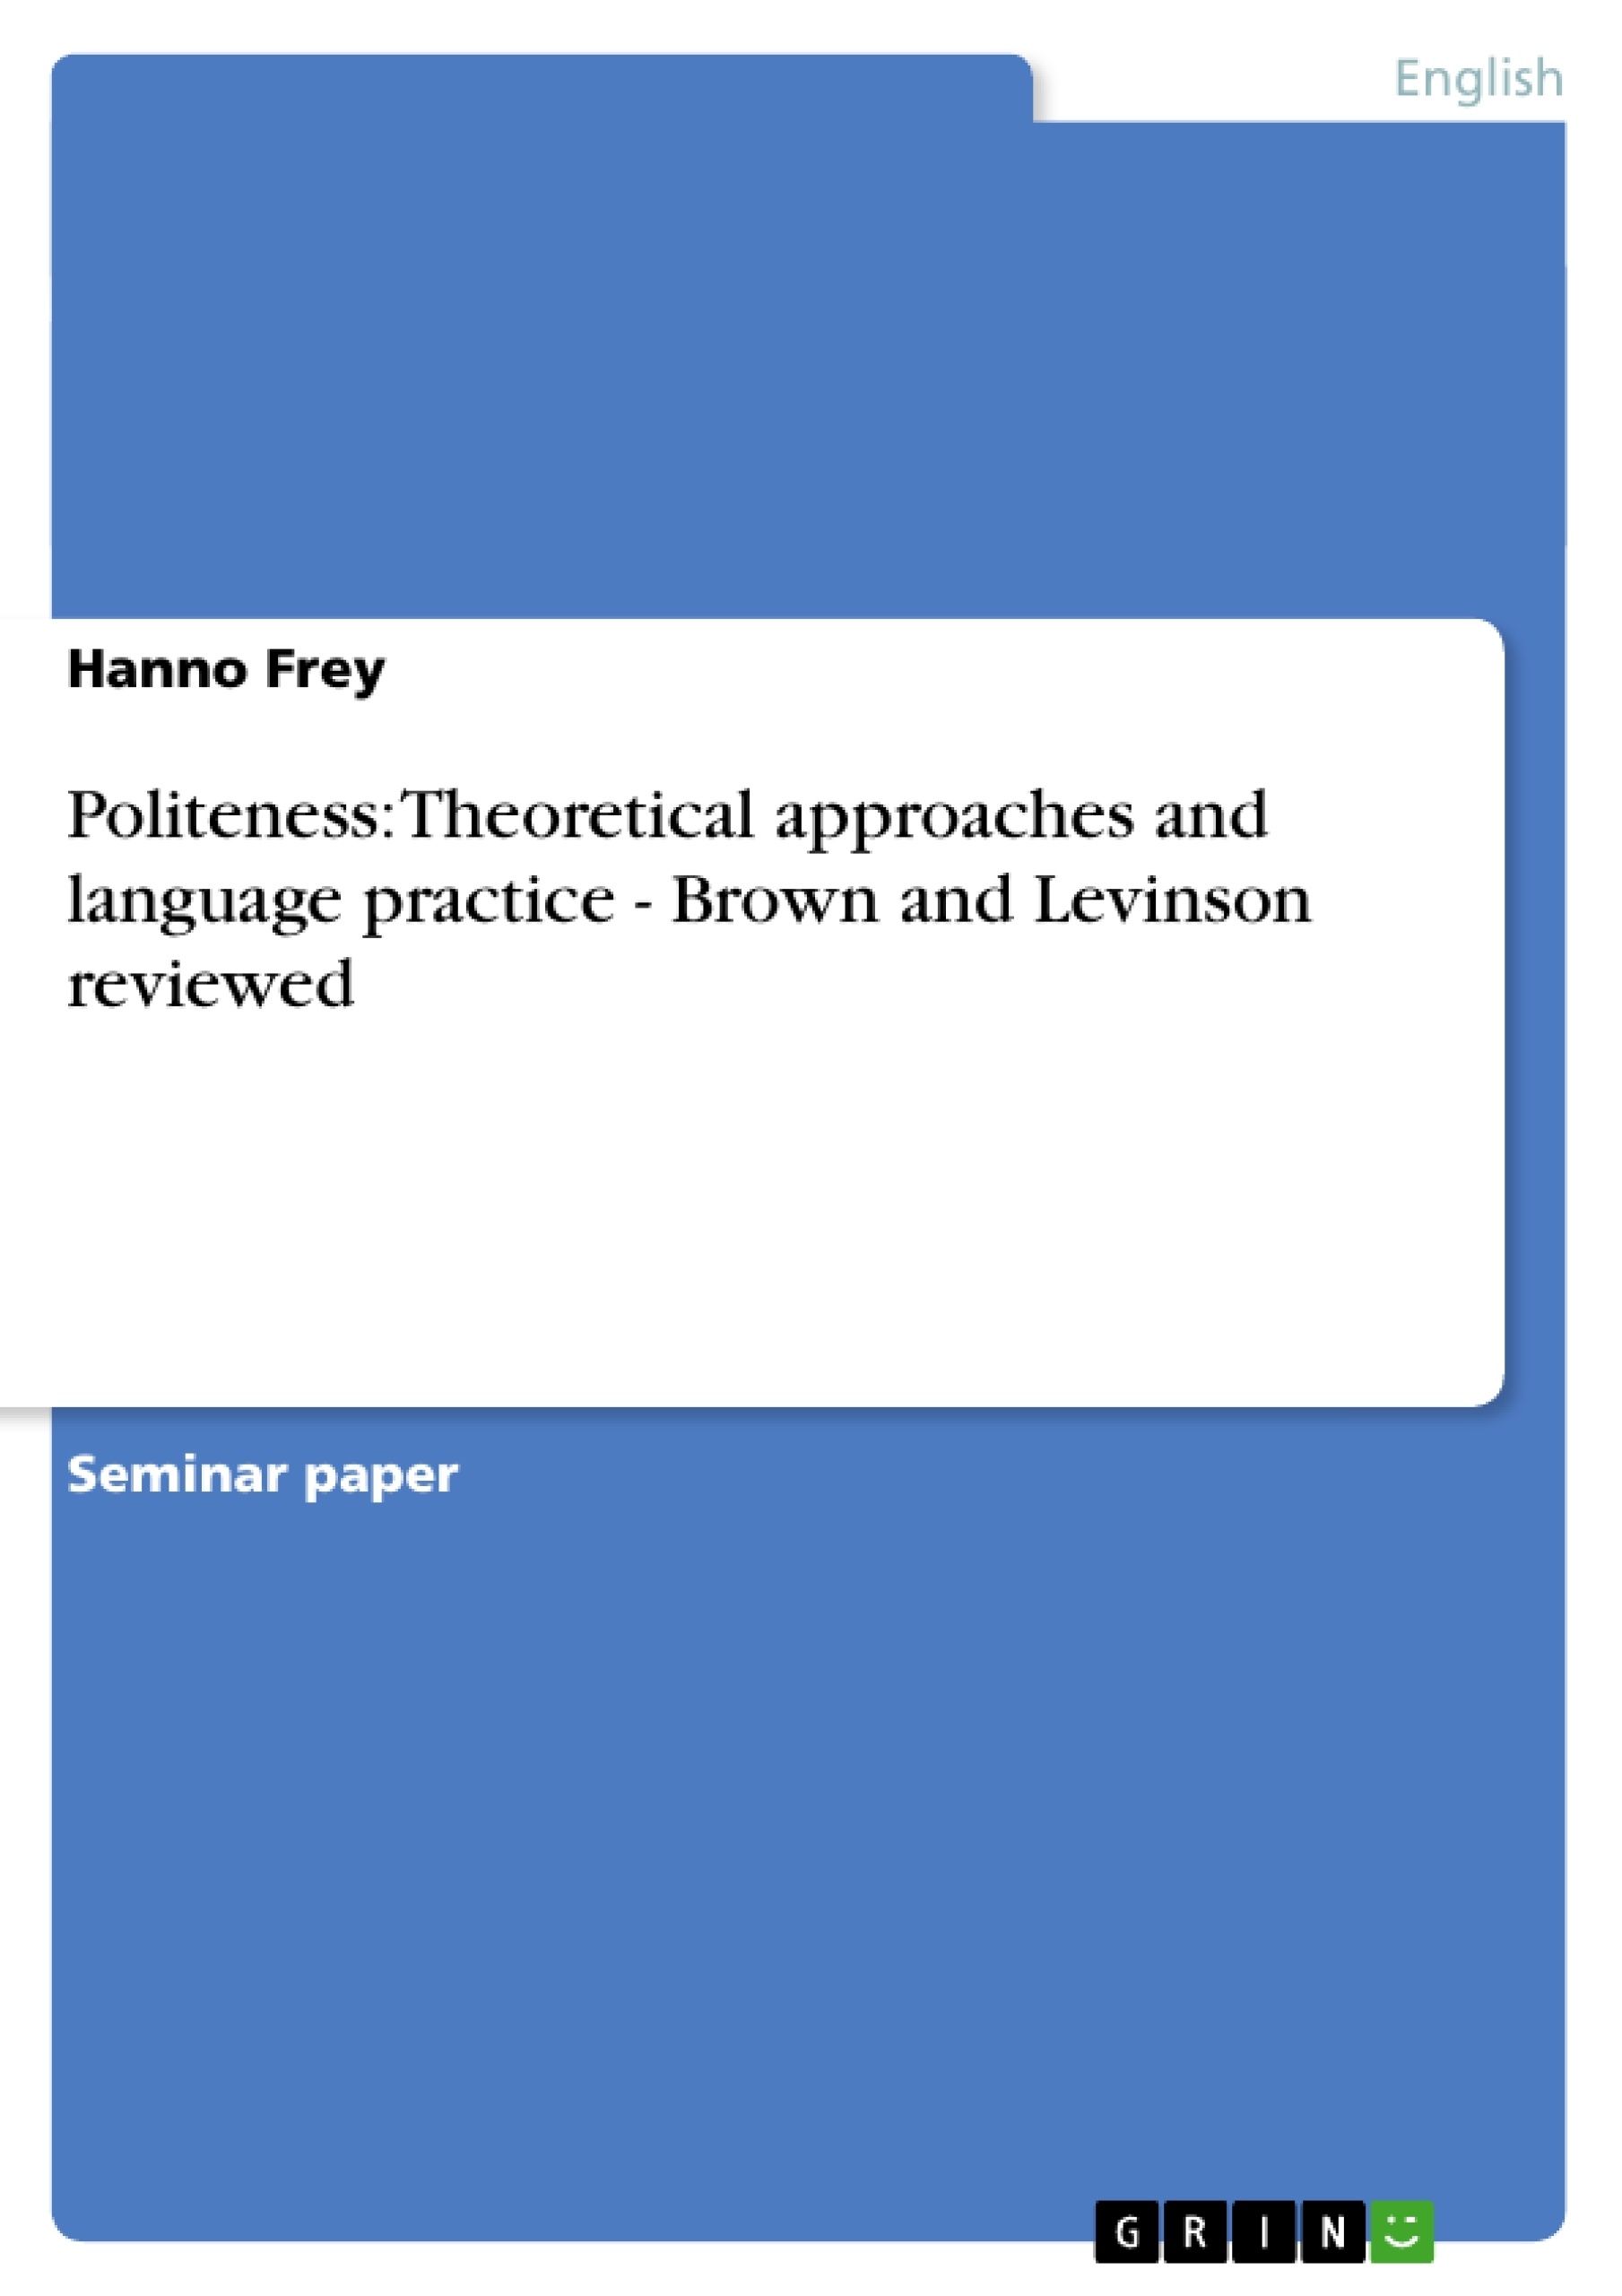 Titre: Politeness: Theoretical approaches and language practice - Brown and Levinson reviewed